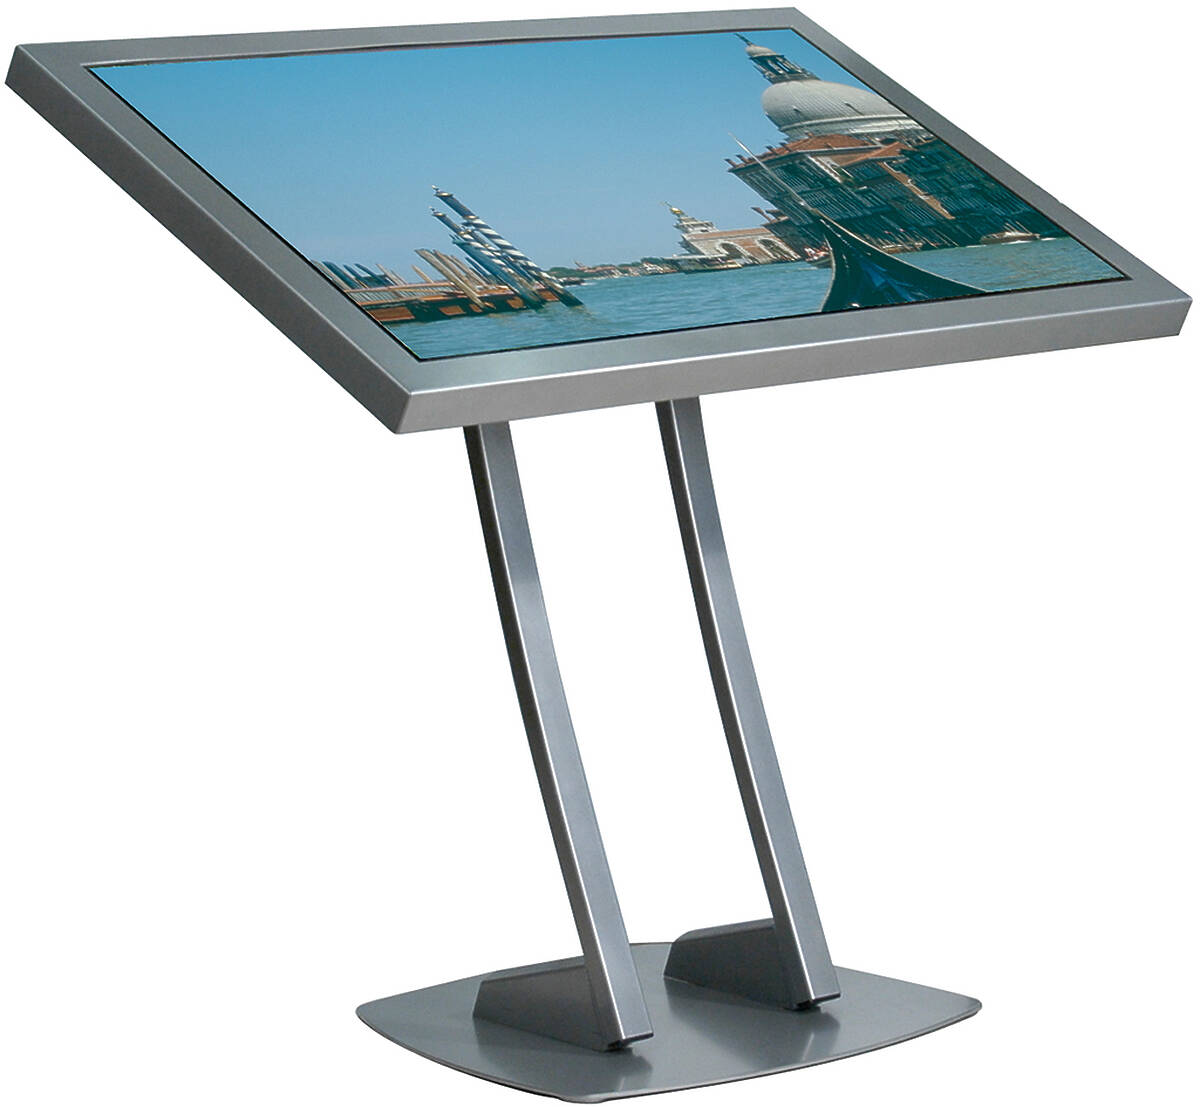 Unicol PA1 Parabella stand, designer low level lectern style for screens from 33 to 50" product image. Click to enlarge.